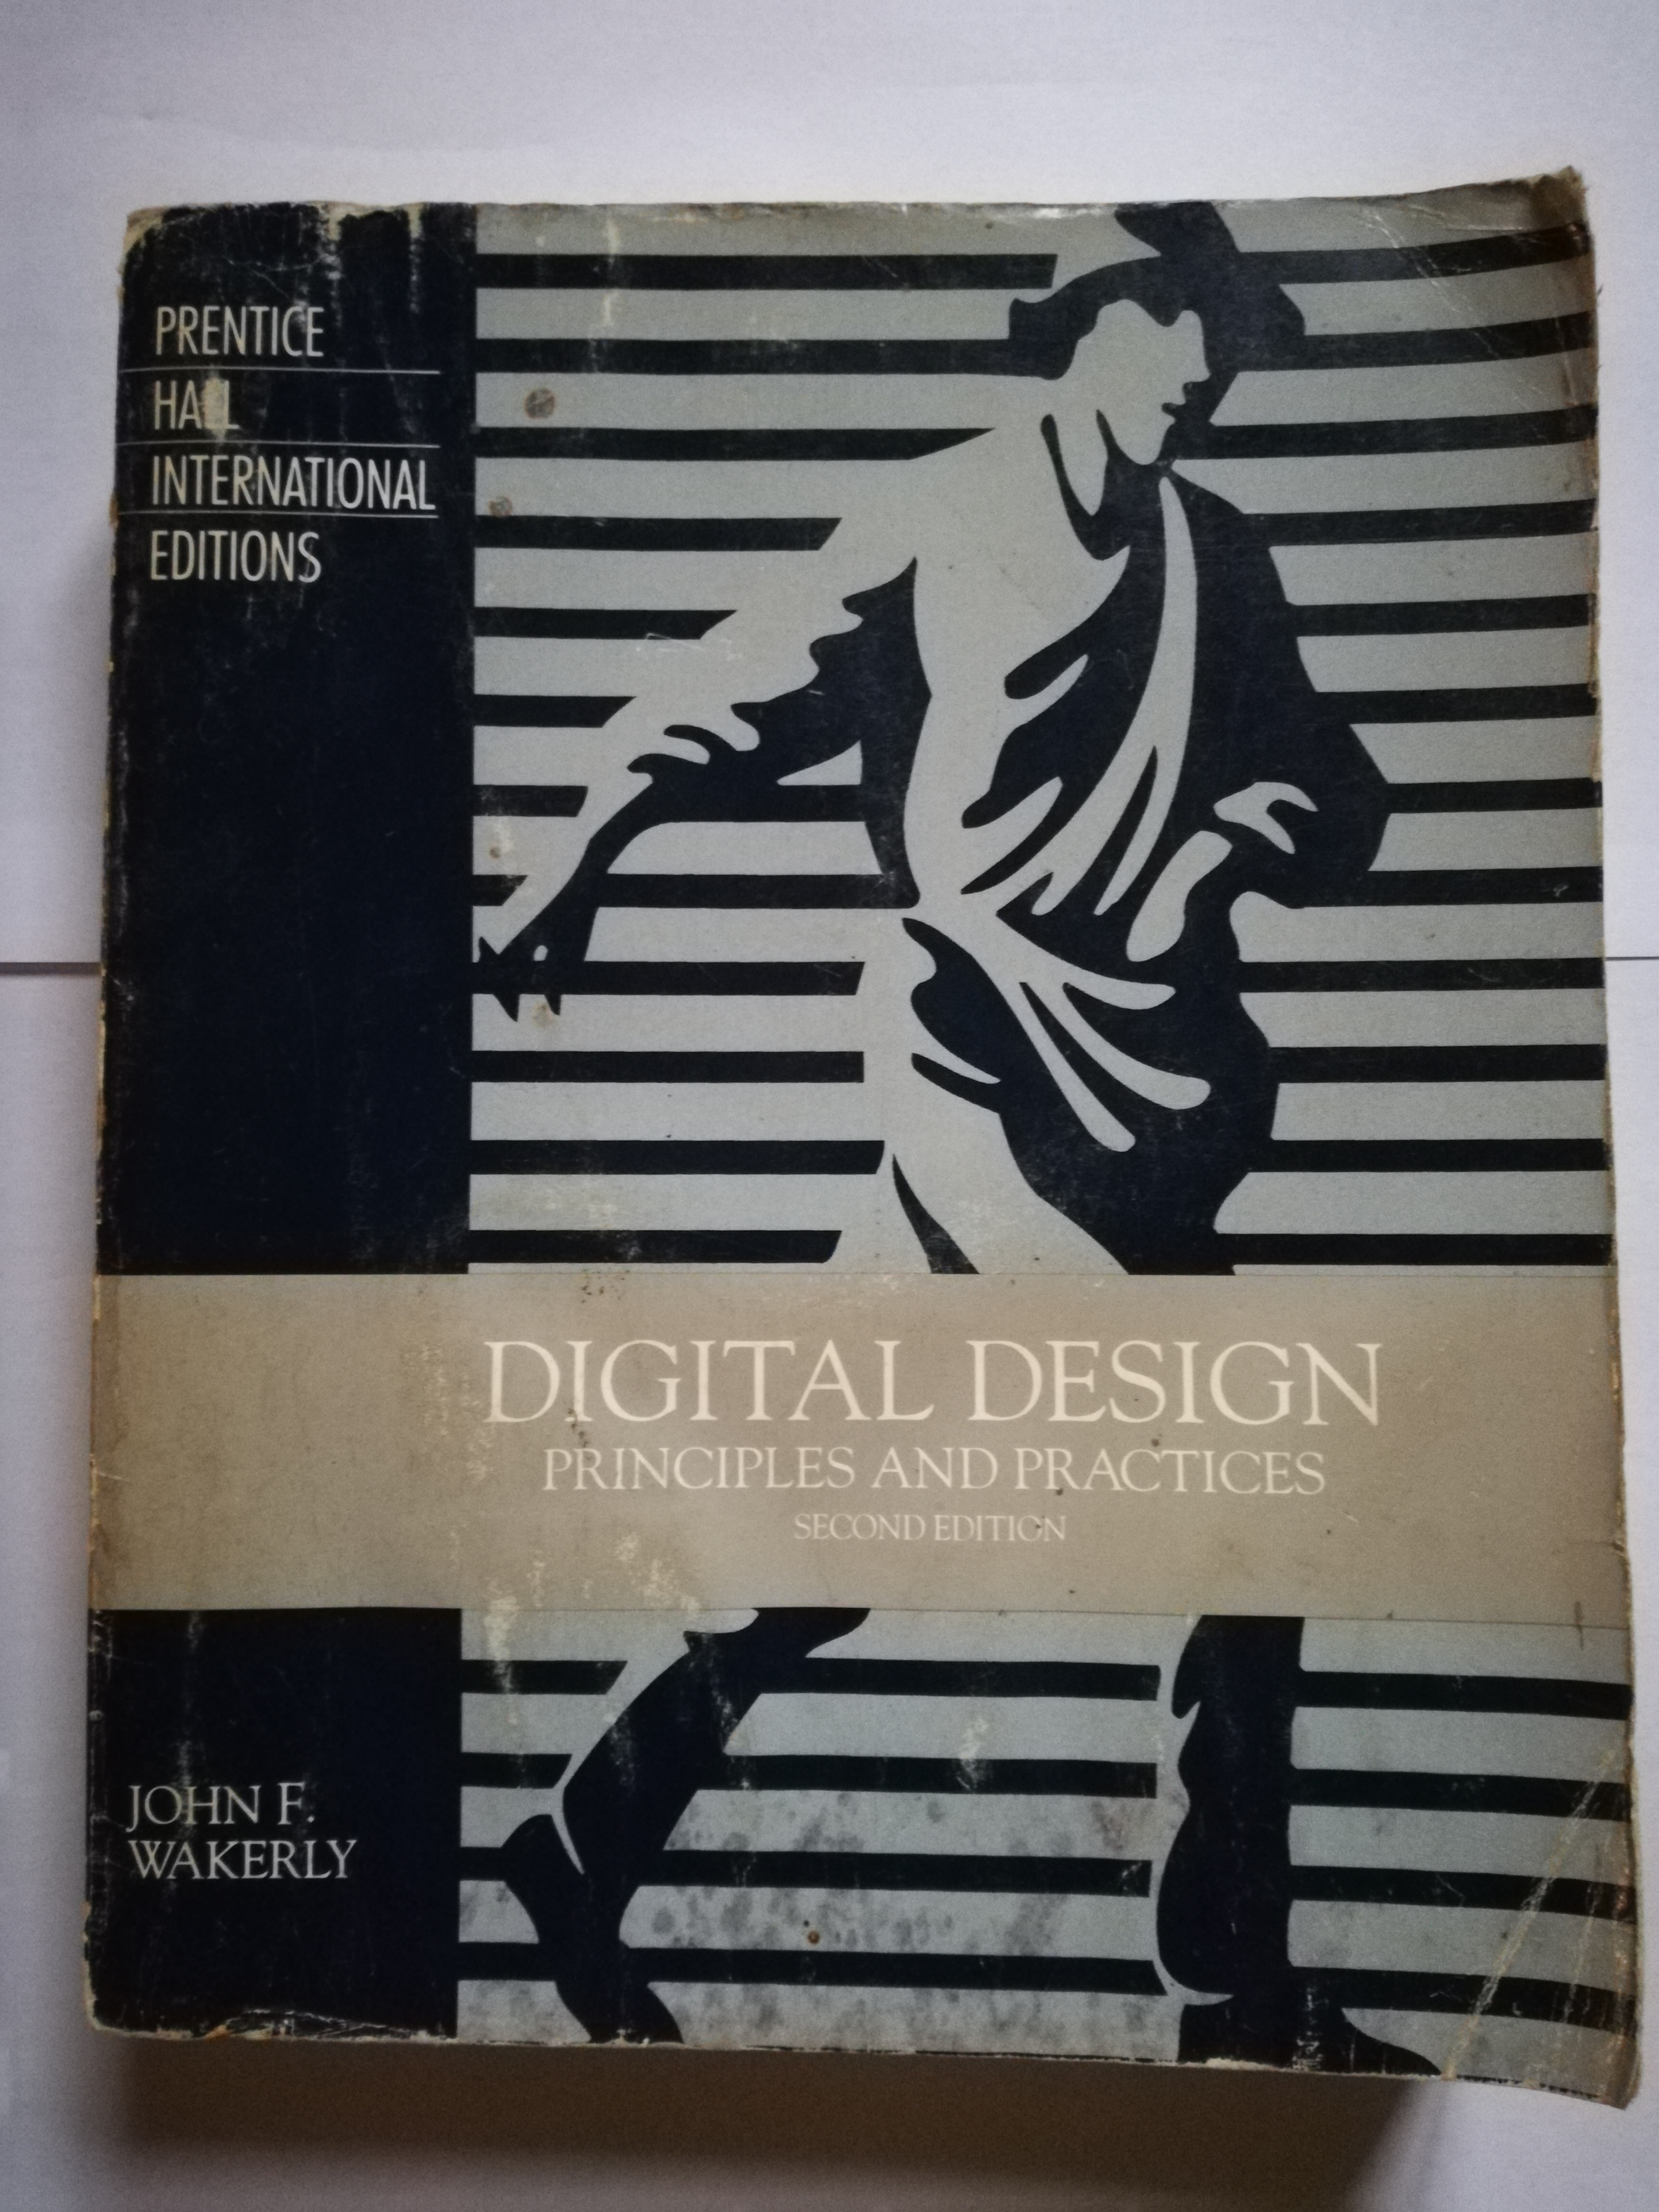 Digital Design PRINCIPLES AND PRACTICES (Second Edition)